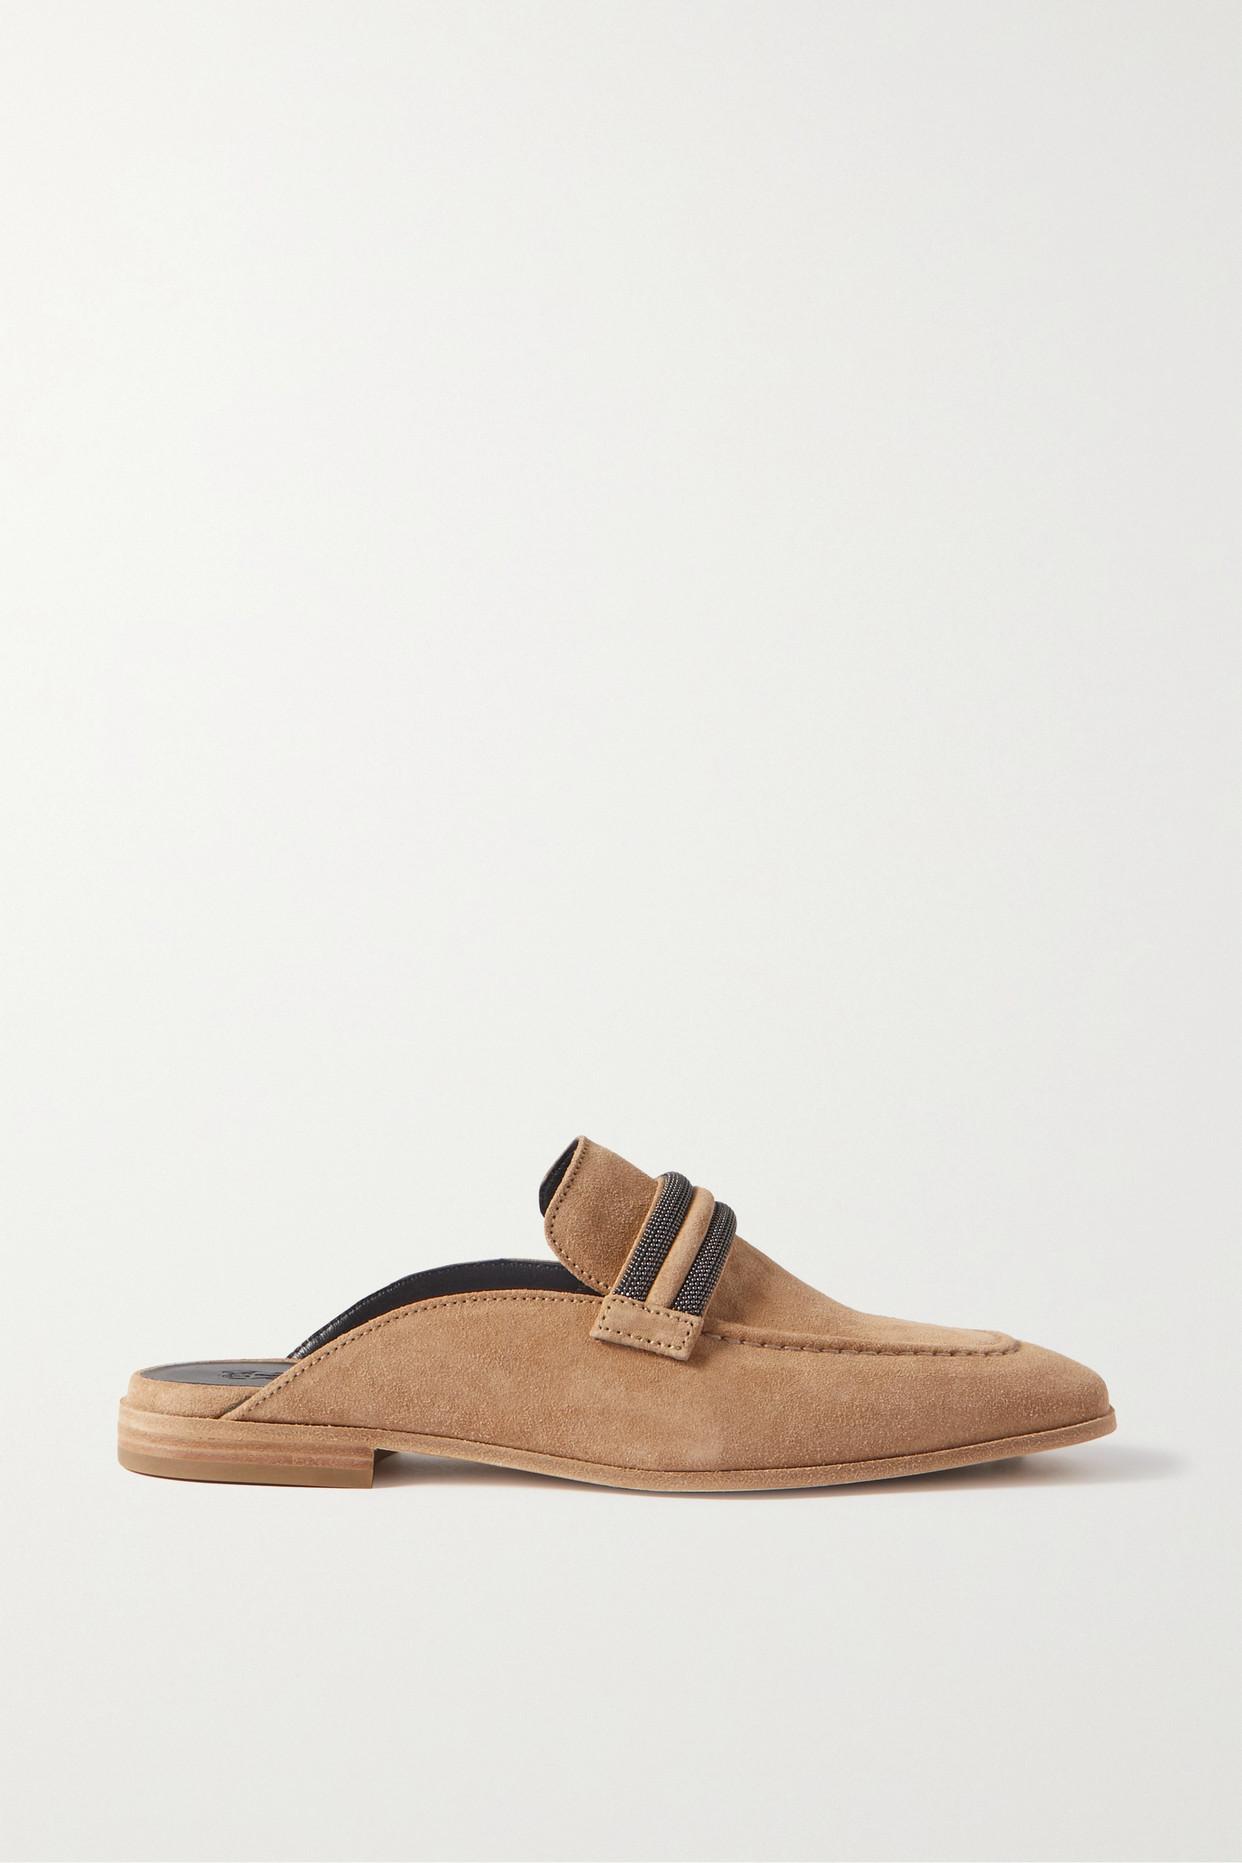 Brunello Cucinelli Bead-embellished Suede Slippers in Brown | Lyst